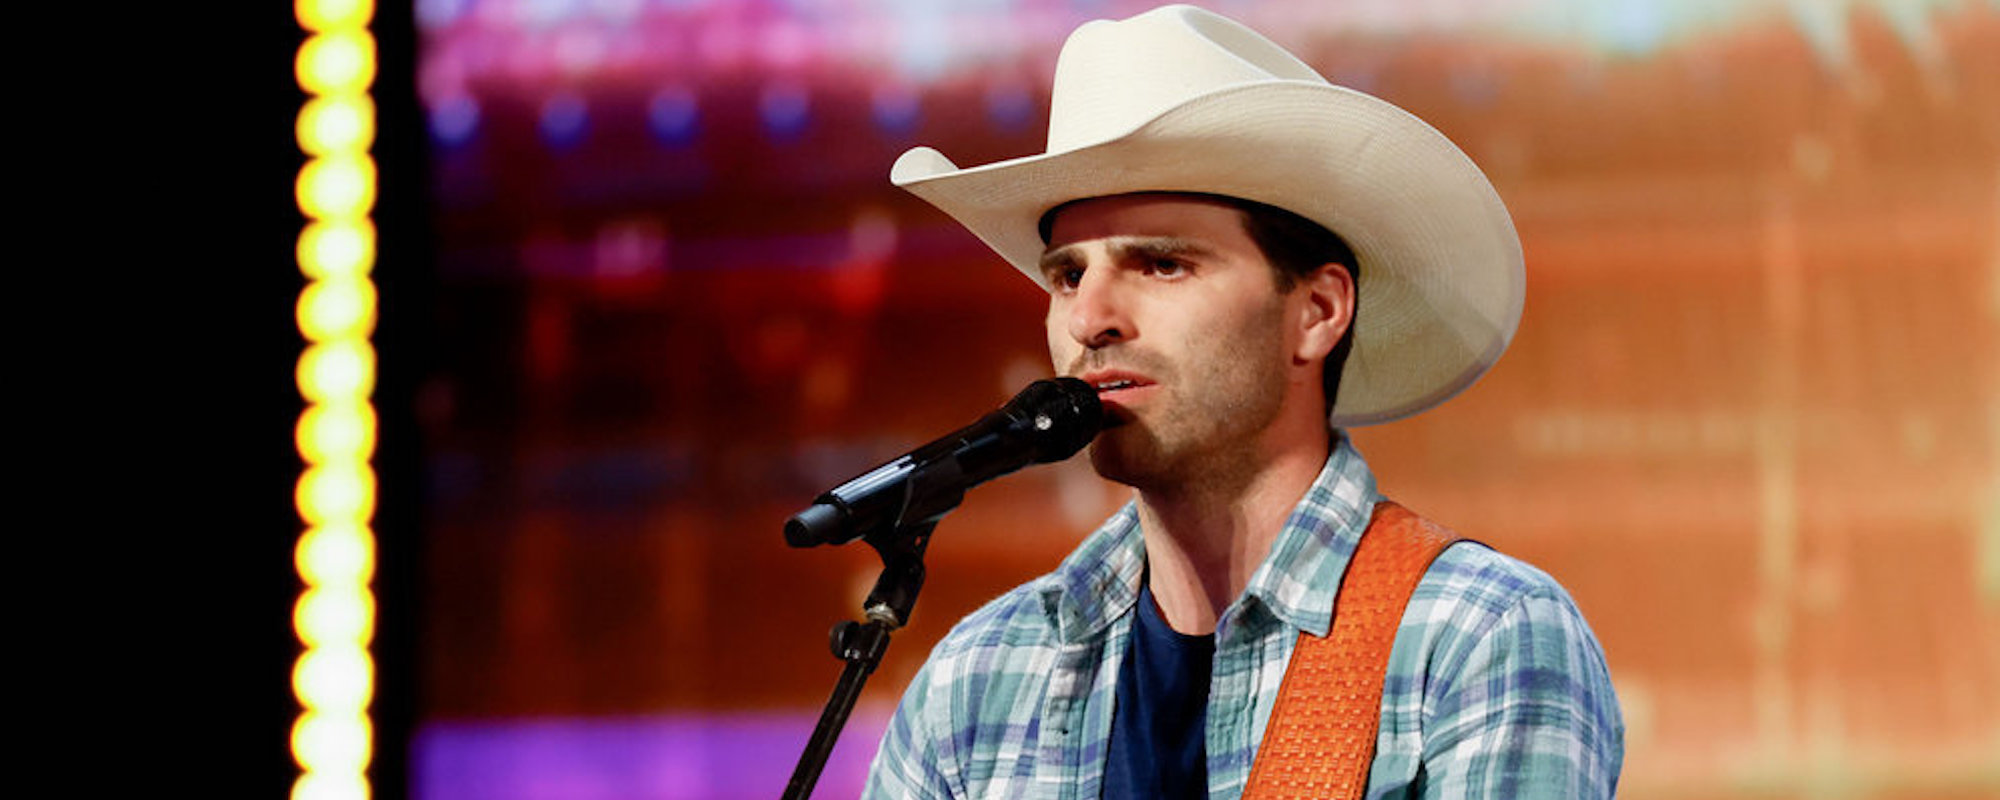 ‘America’s Got Talent’ Singer Mitch Rossell Shares “Son” for Father Killed in Freak Accident